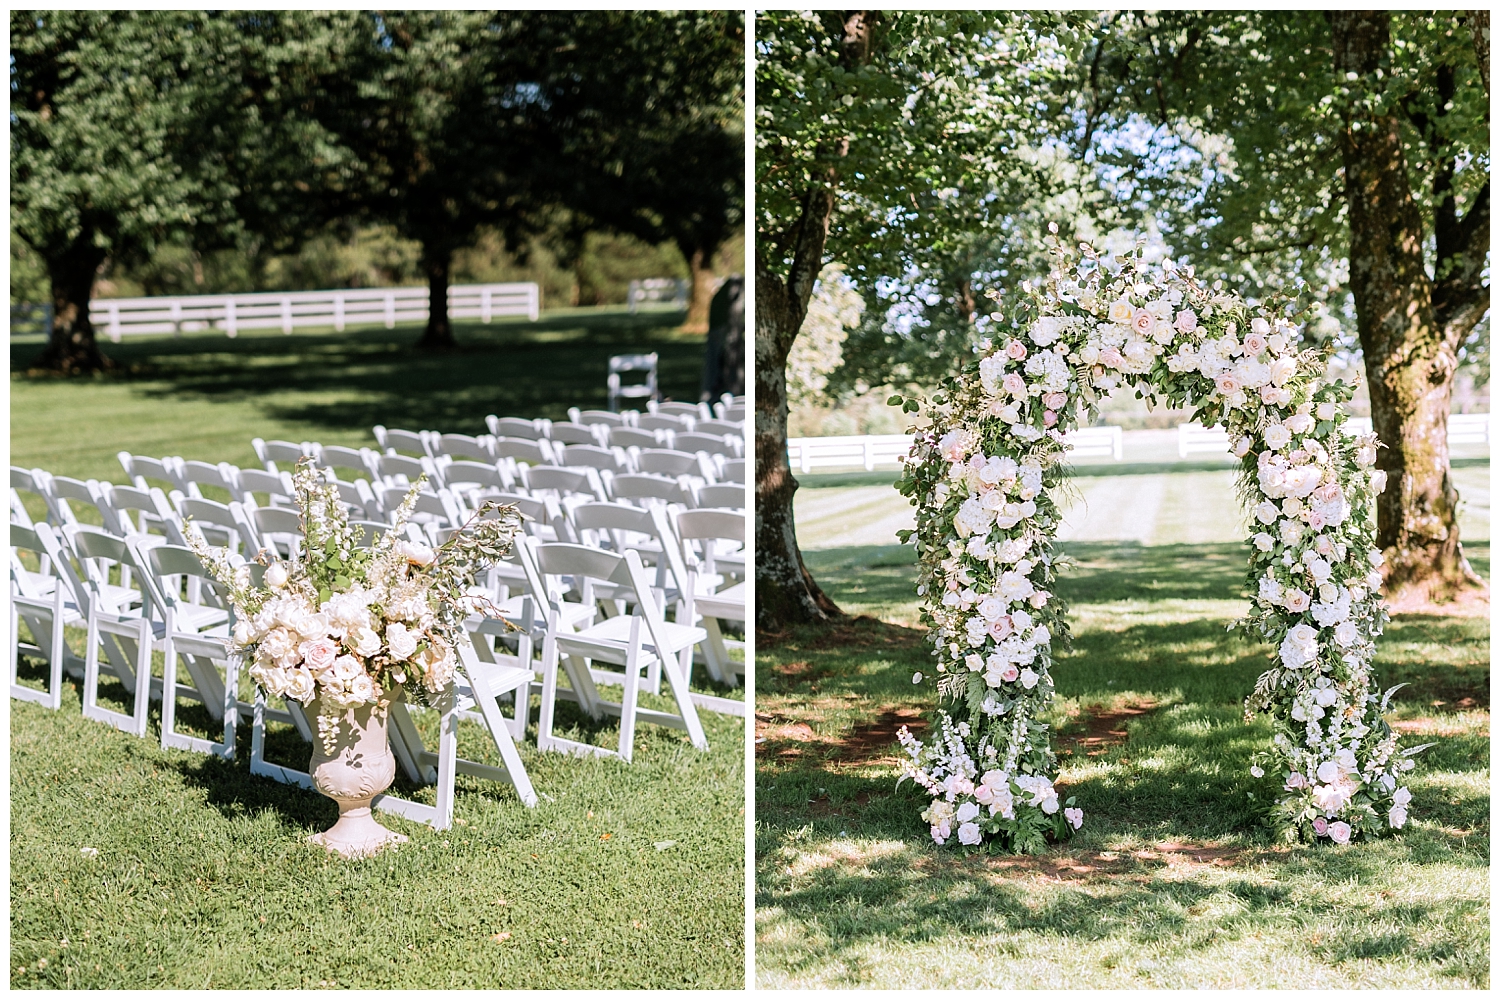 Ceremony details and floral arch for wedding at Castle Hill Cidery